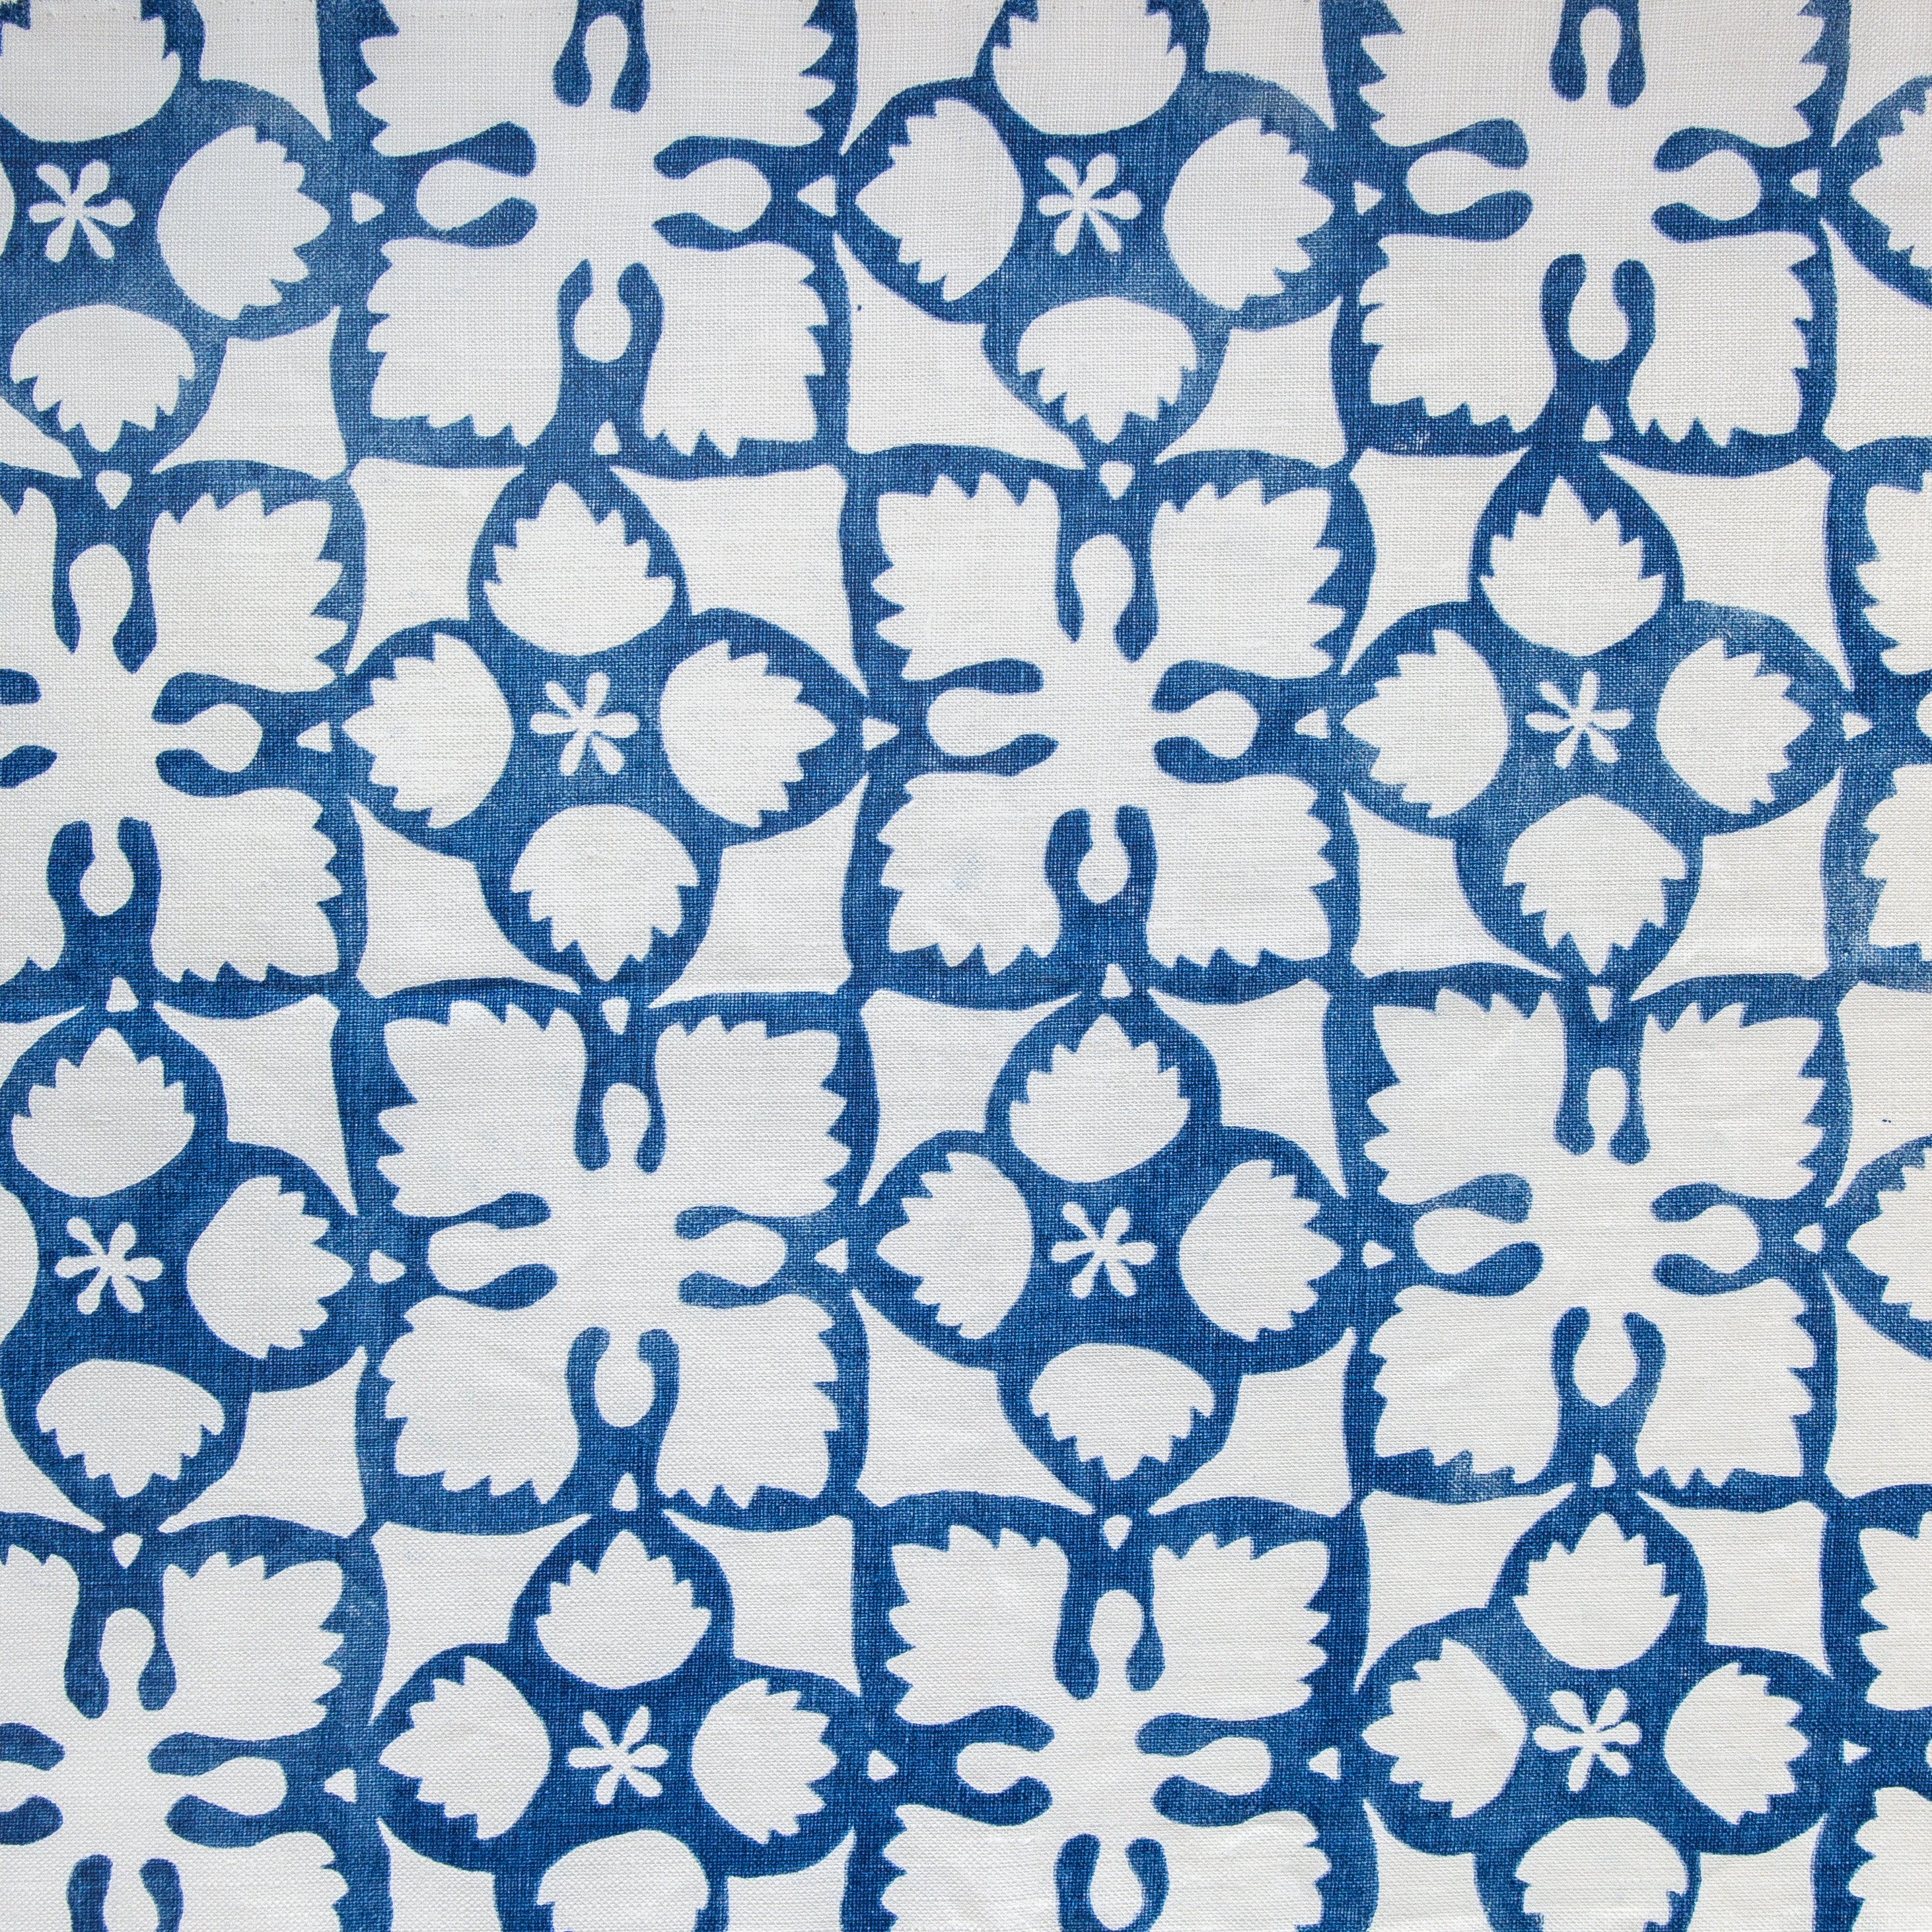 Detail of fabric in a botanical lattice print in blue on a white field.